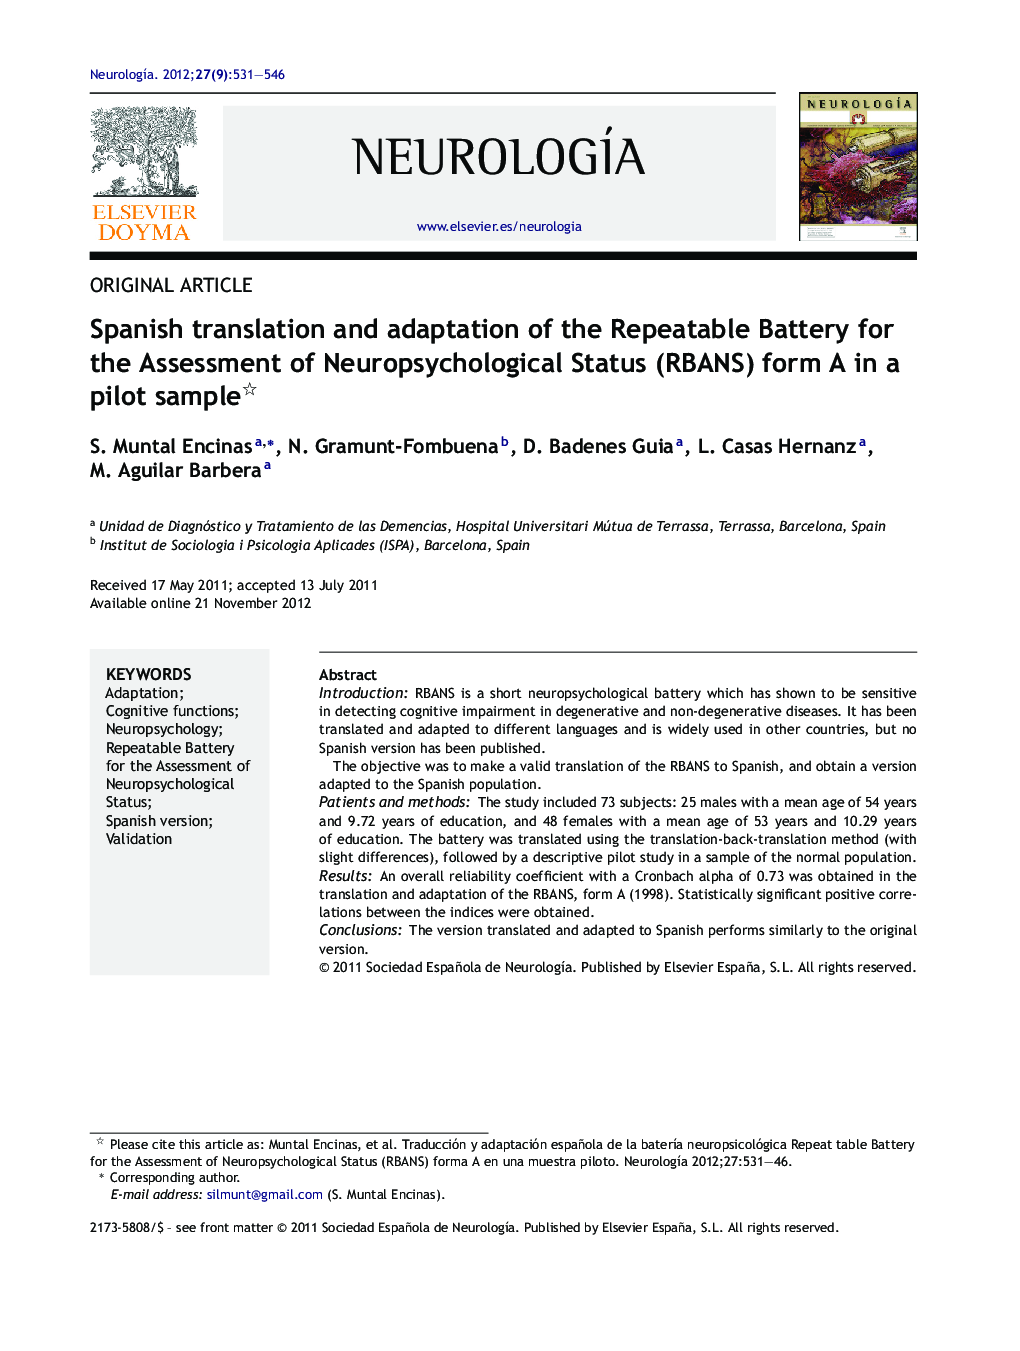 Spanish translation and adaptation of the Repeatable Battery for the Assessment of Neuropsychological Status (RBANS) form A in a pilot sample 